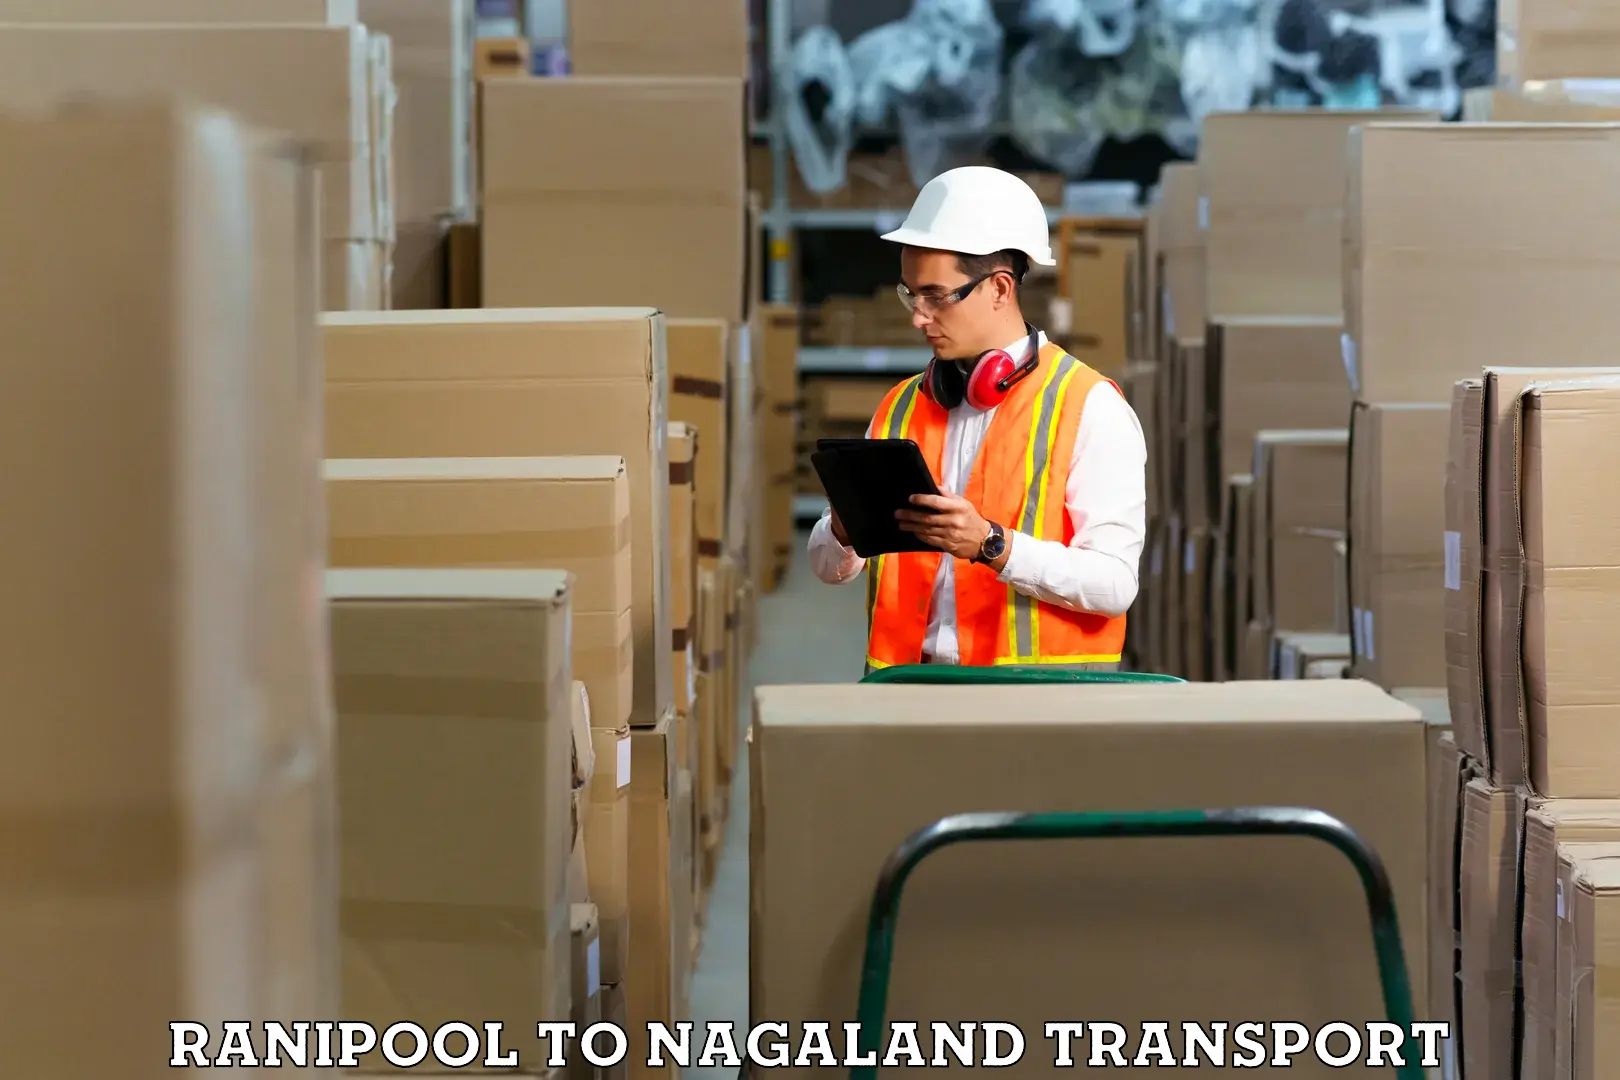 Container transport service Ranipool to Nagaland